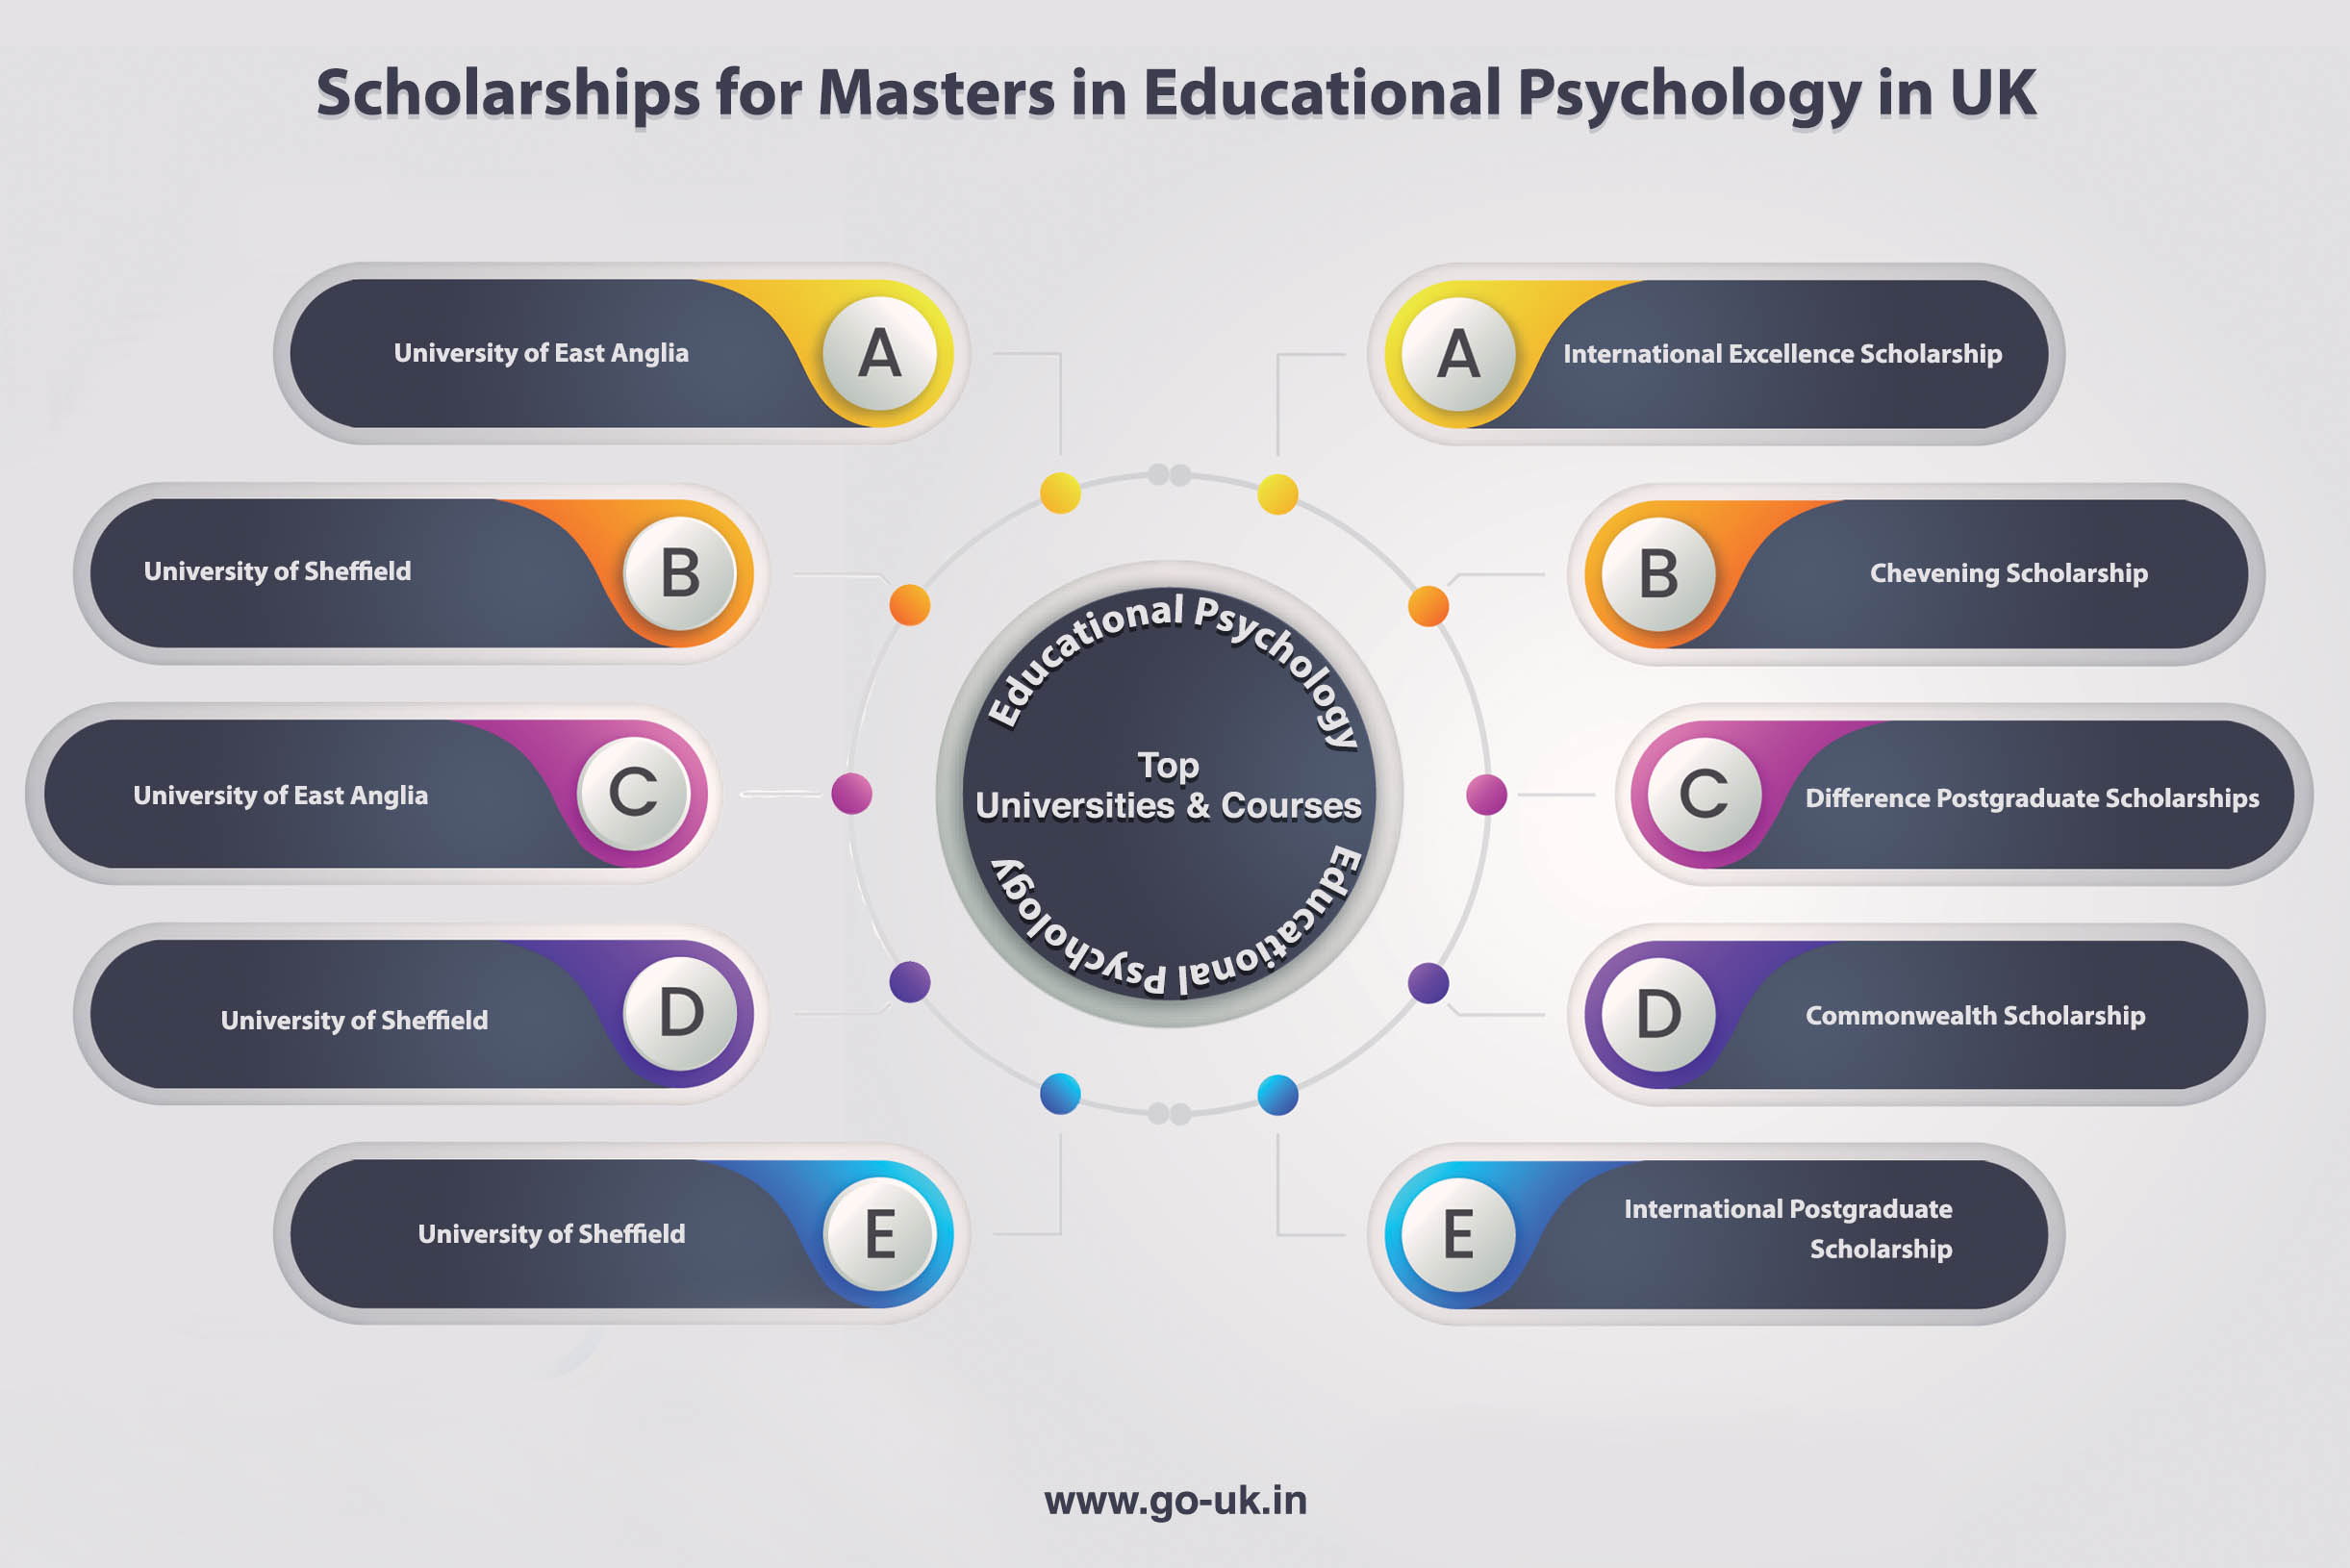 Scholarships for Masters in Educational Psychology in UK